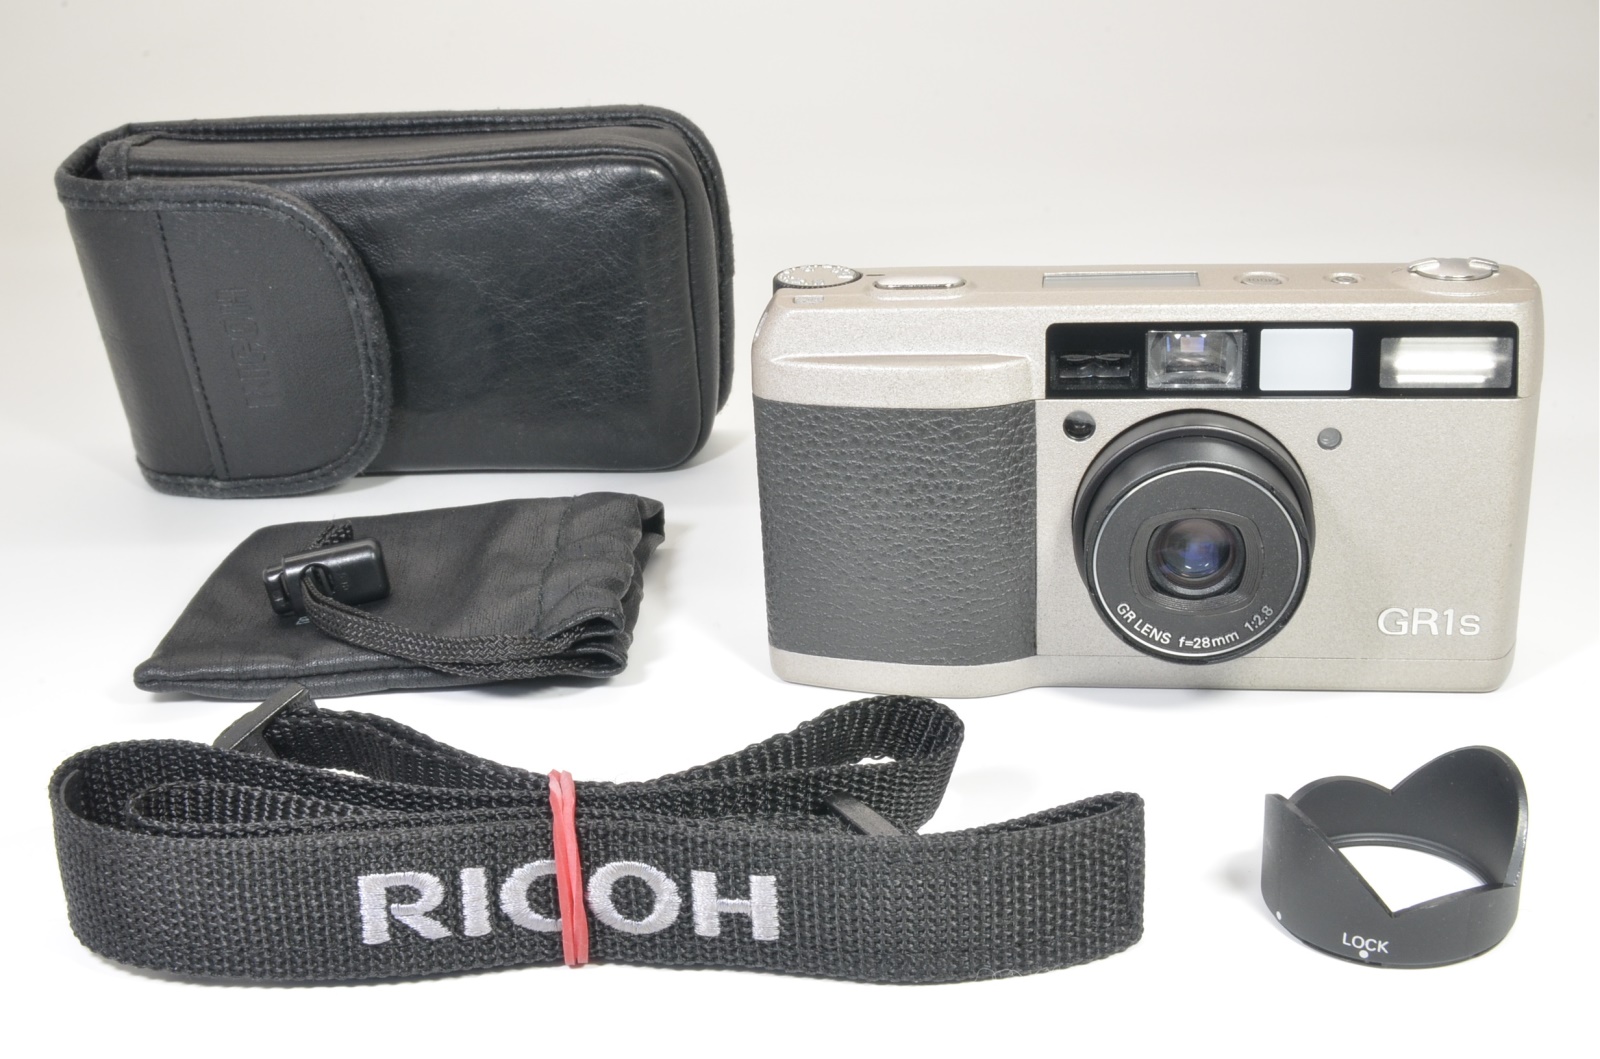 ricoh gr1s date silver 28mm f2.8 p&s film camera from japan shooting tested